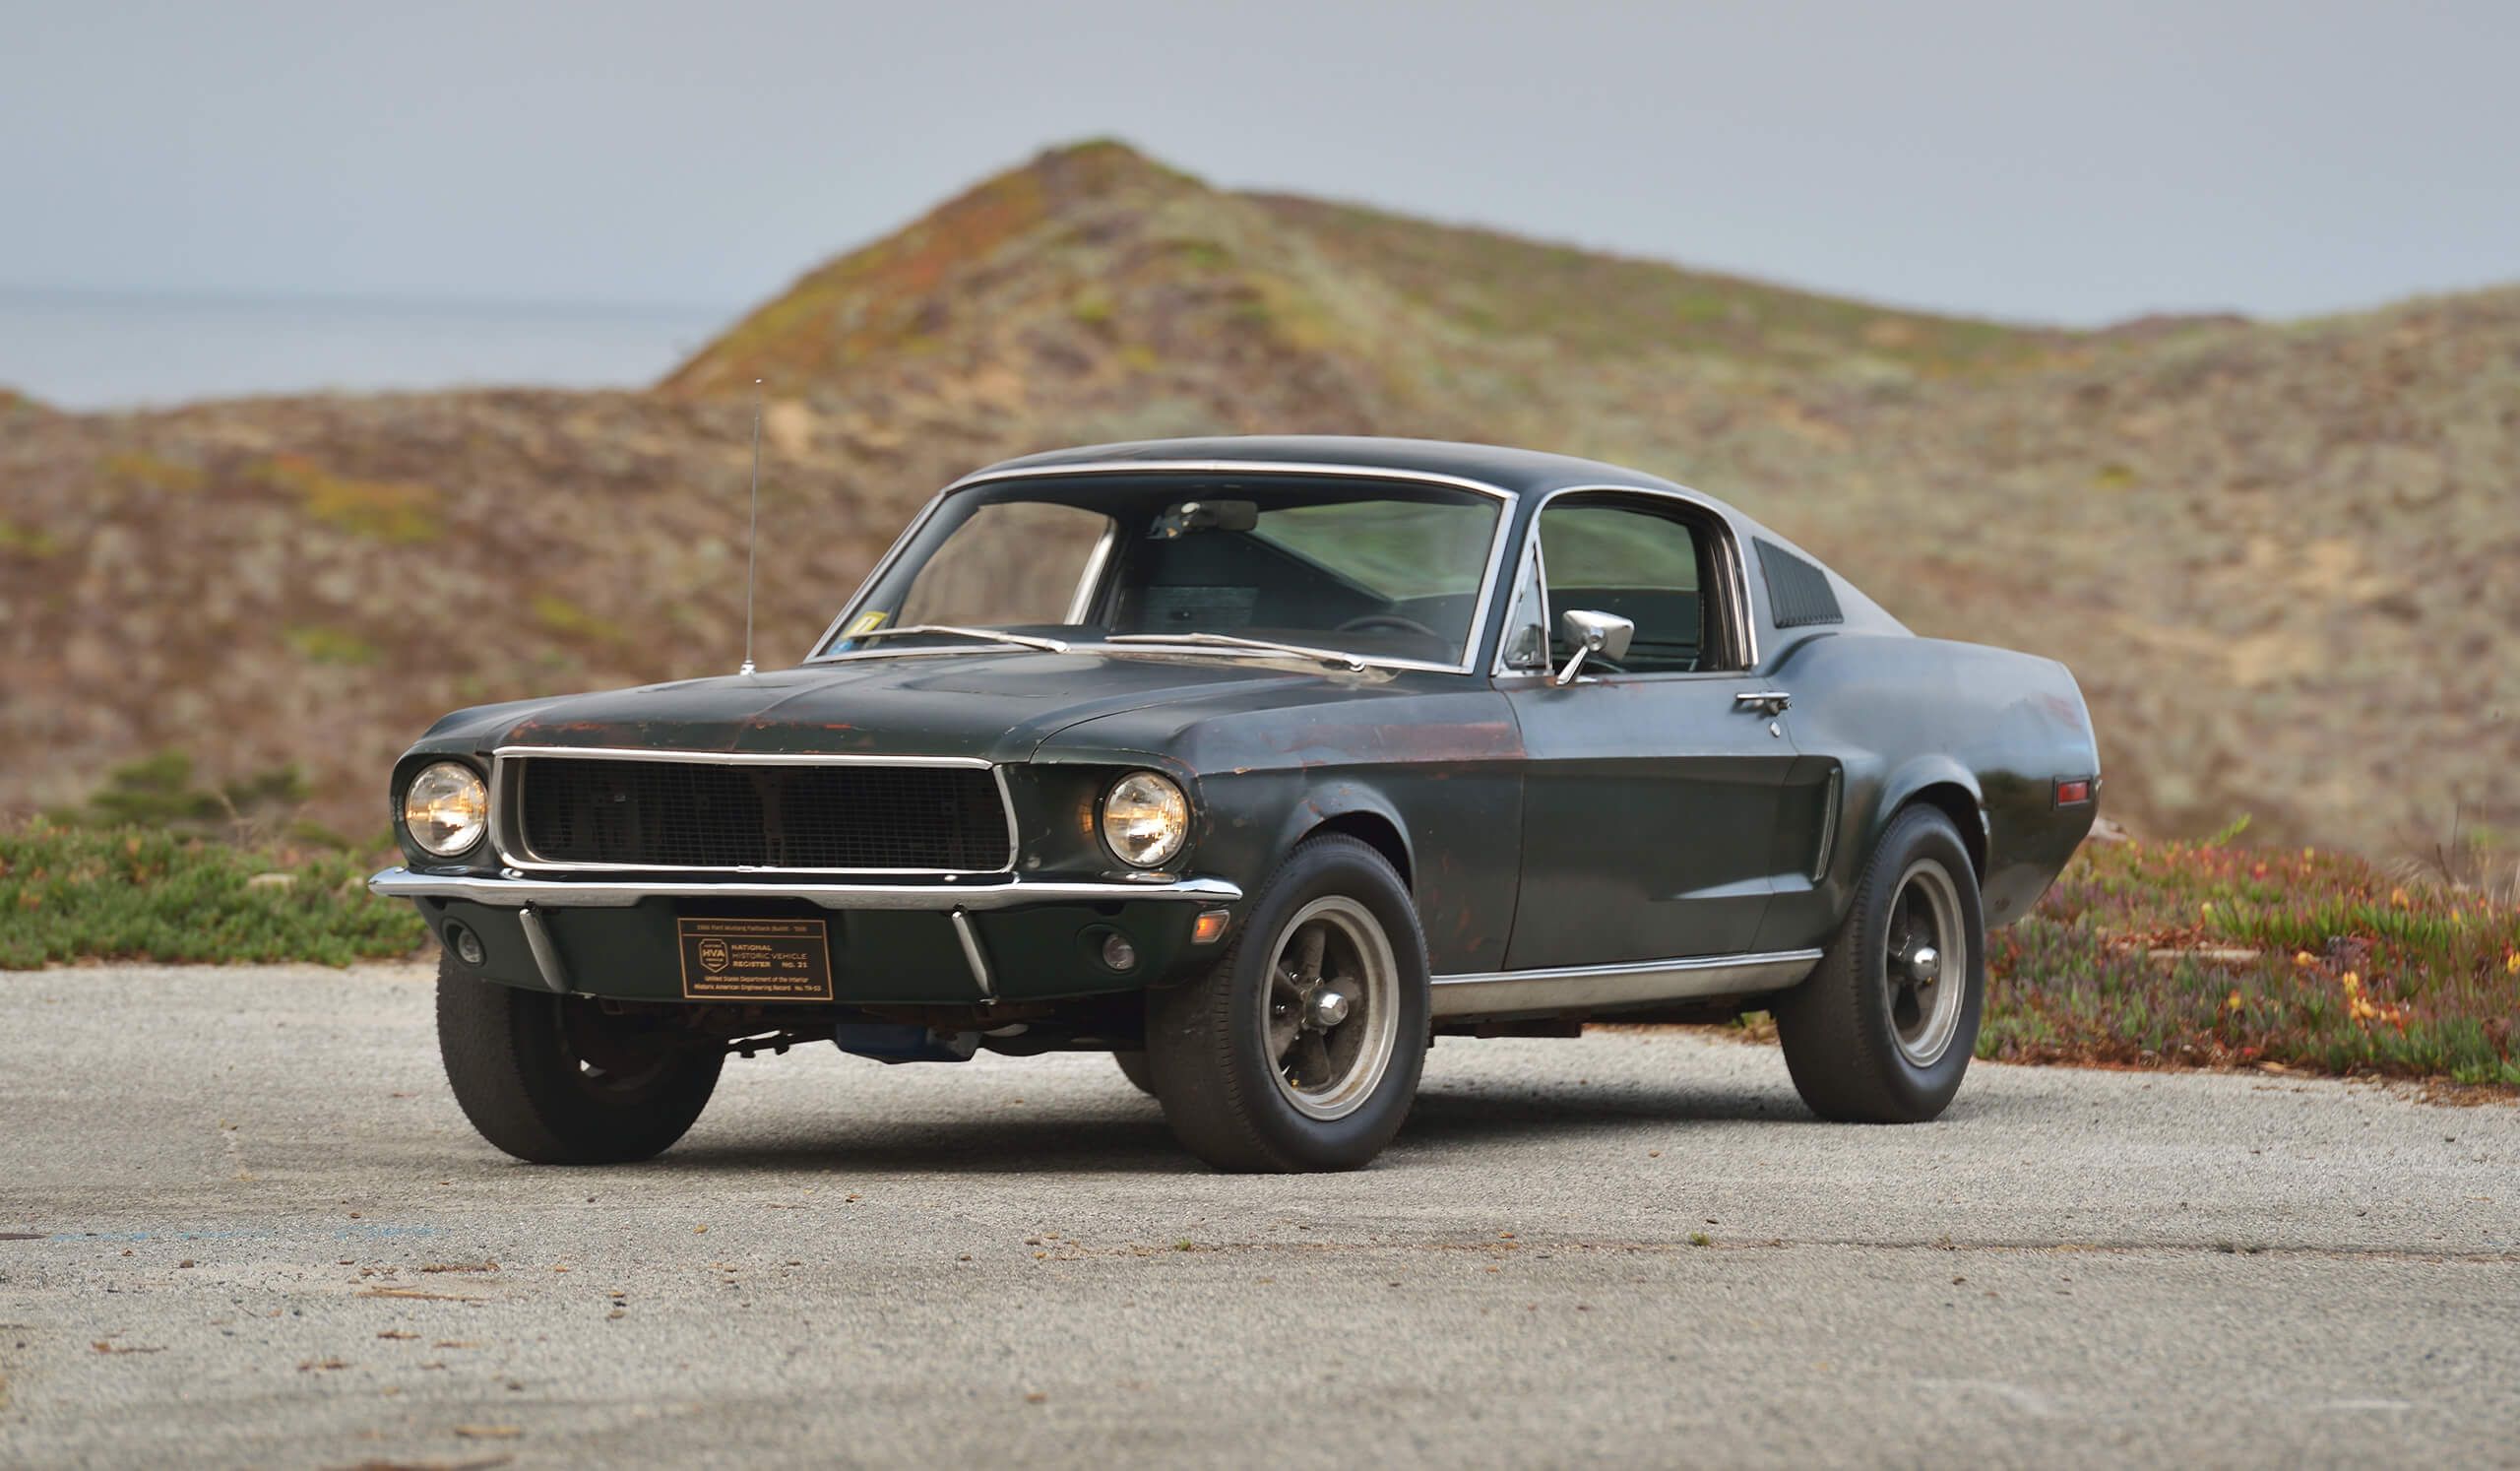 Original Bullitt Is Most Valuable Mustang Ever After $3.4M Sale